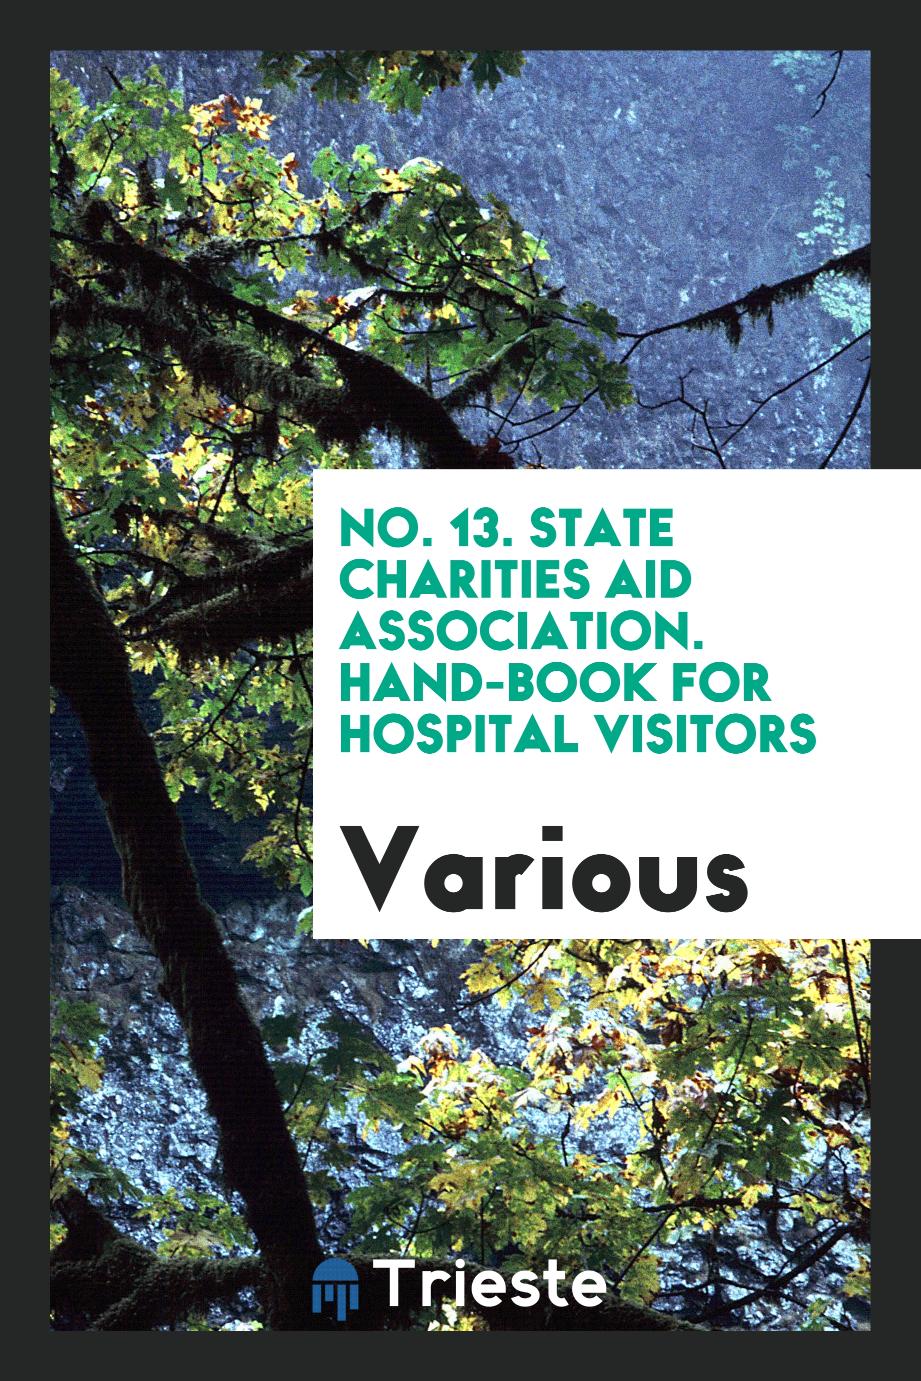 No. 13. State Charities Aid Association. Hand-Book for Hospital Visitors